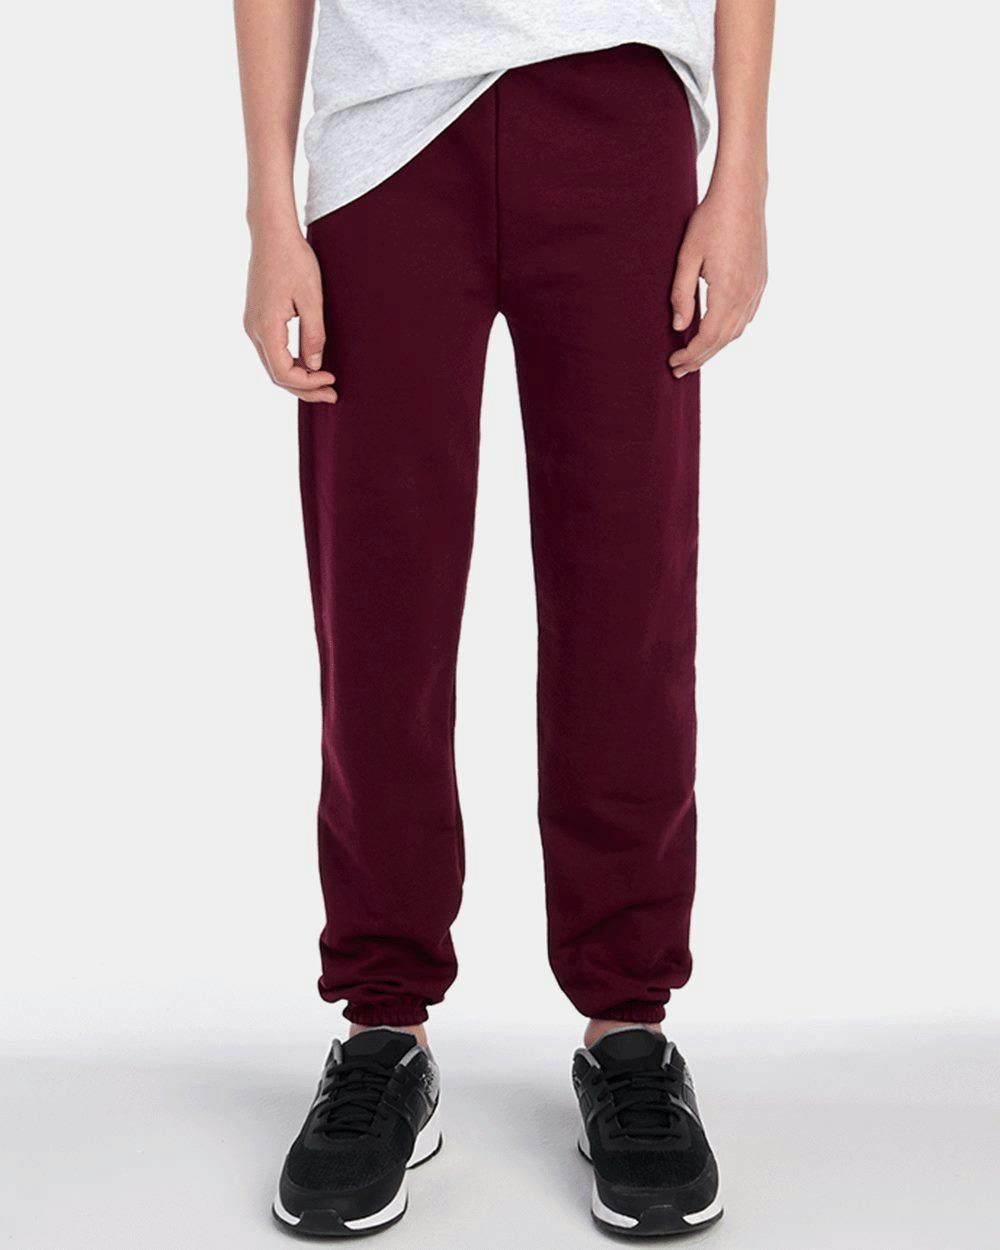 Image for NuBlend® Youth Sweatpants - 973BR